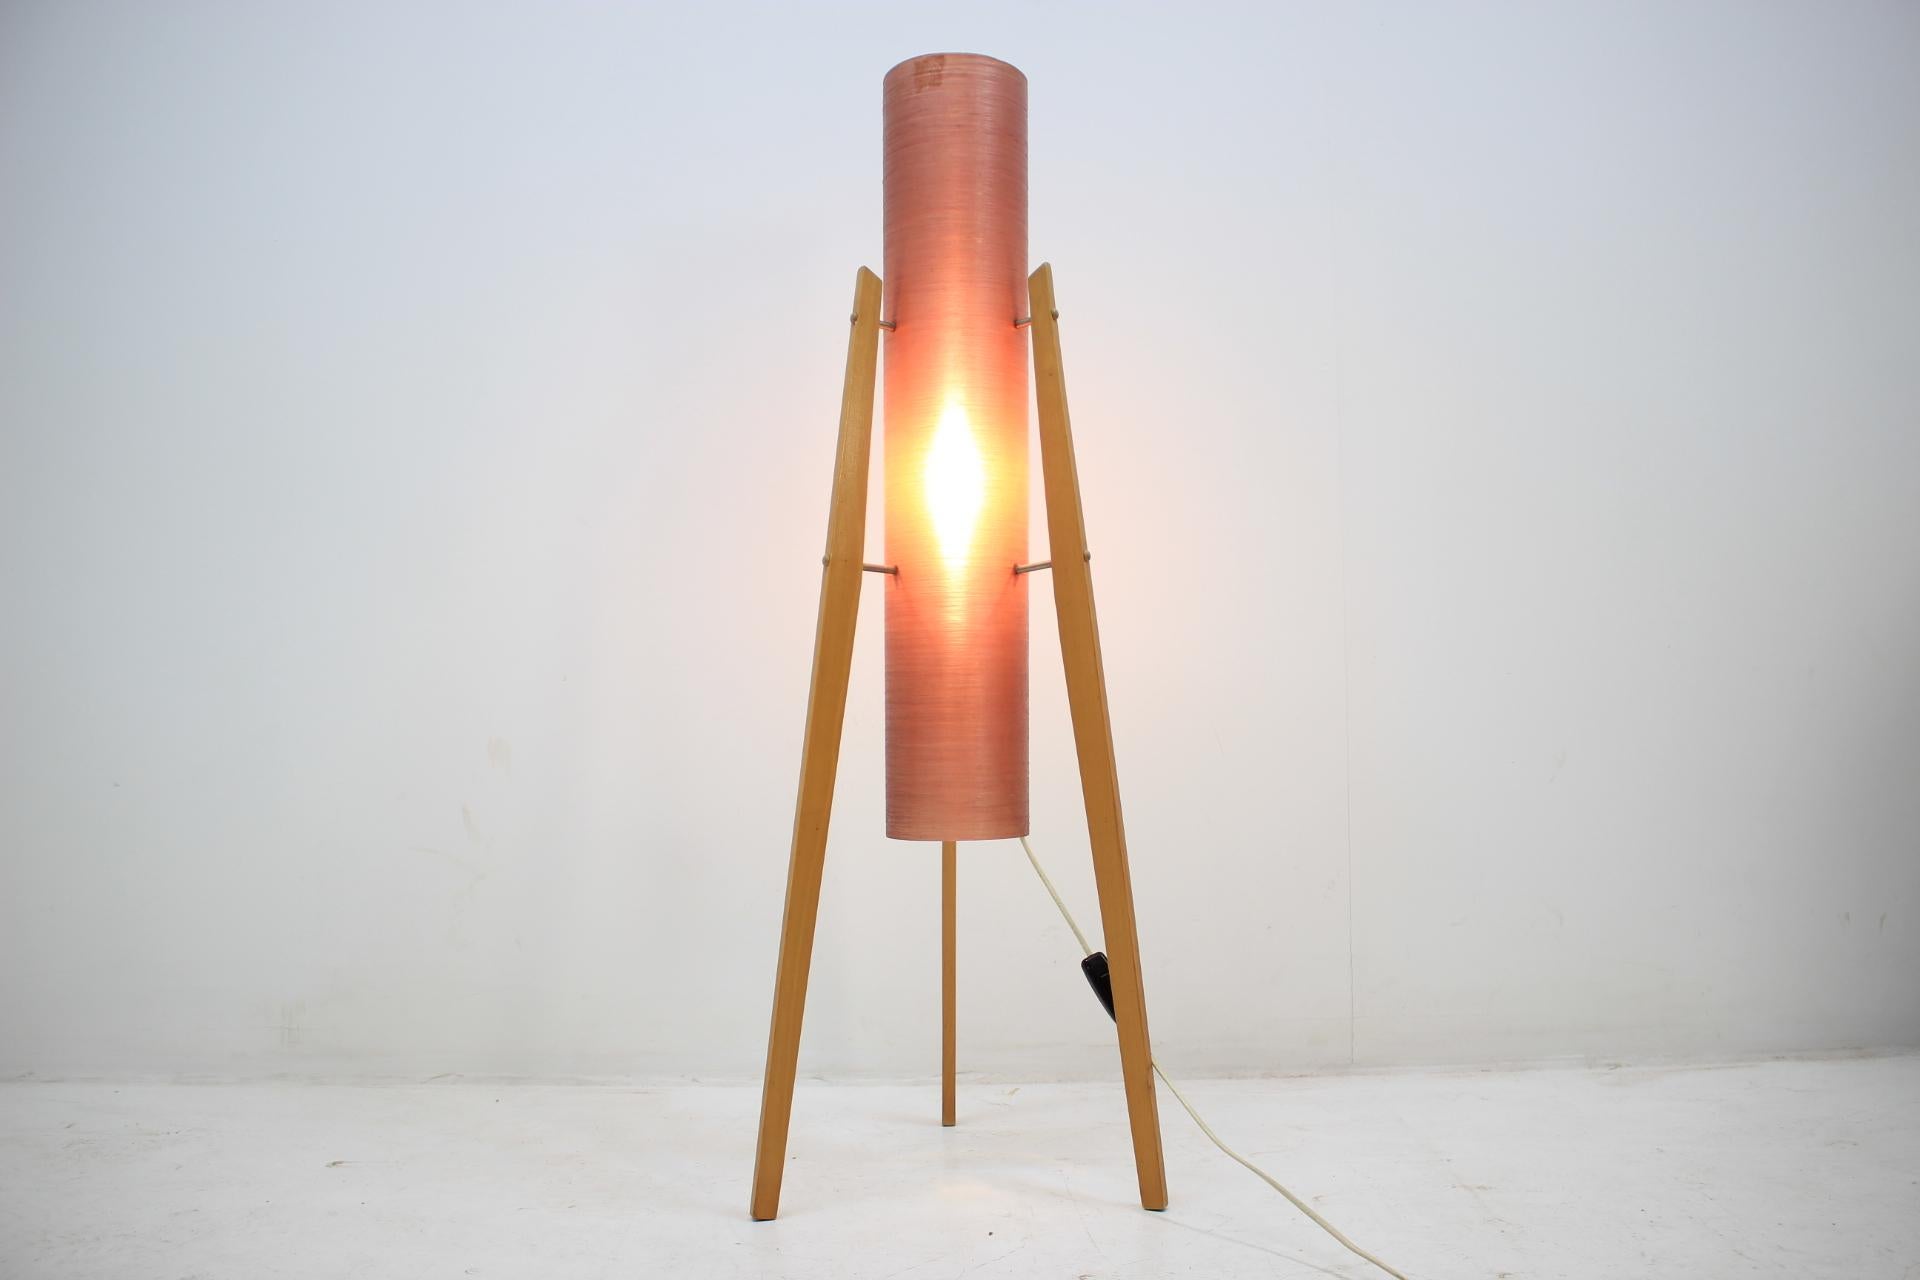 Space-Age Midcentury Lamp Called 